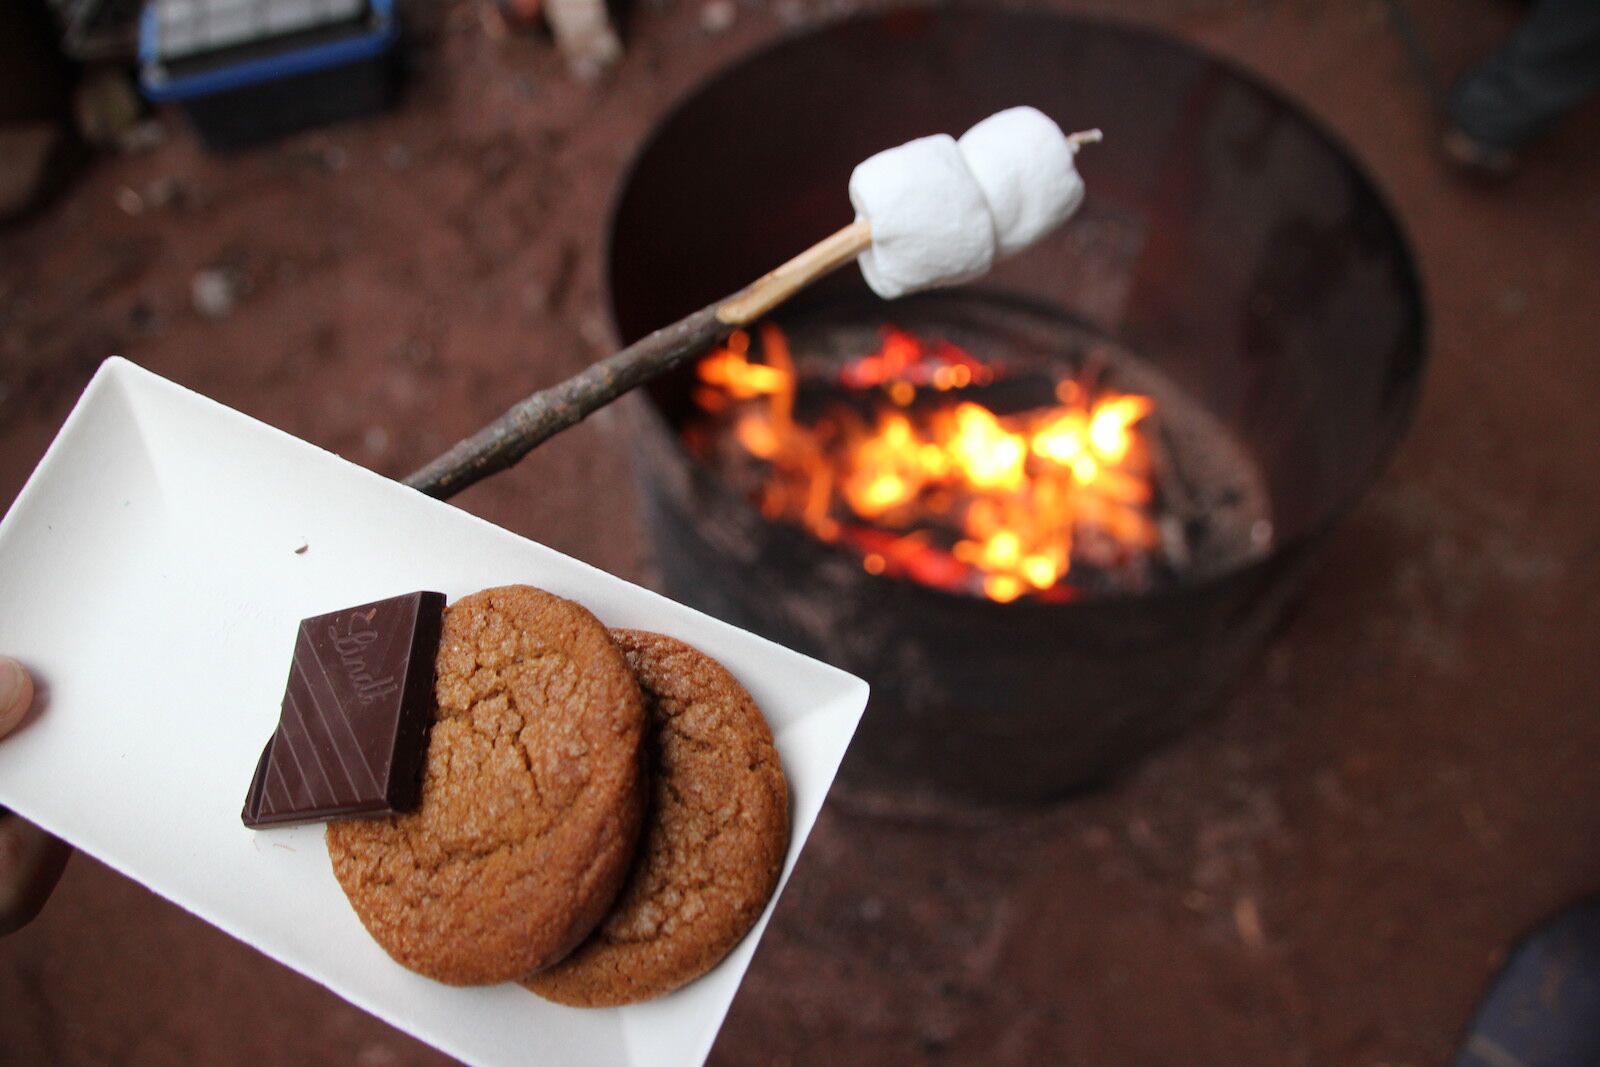 ginger snaps and chocolate on plate with marshmallows on a stick over open fire - savour the sea caves